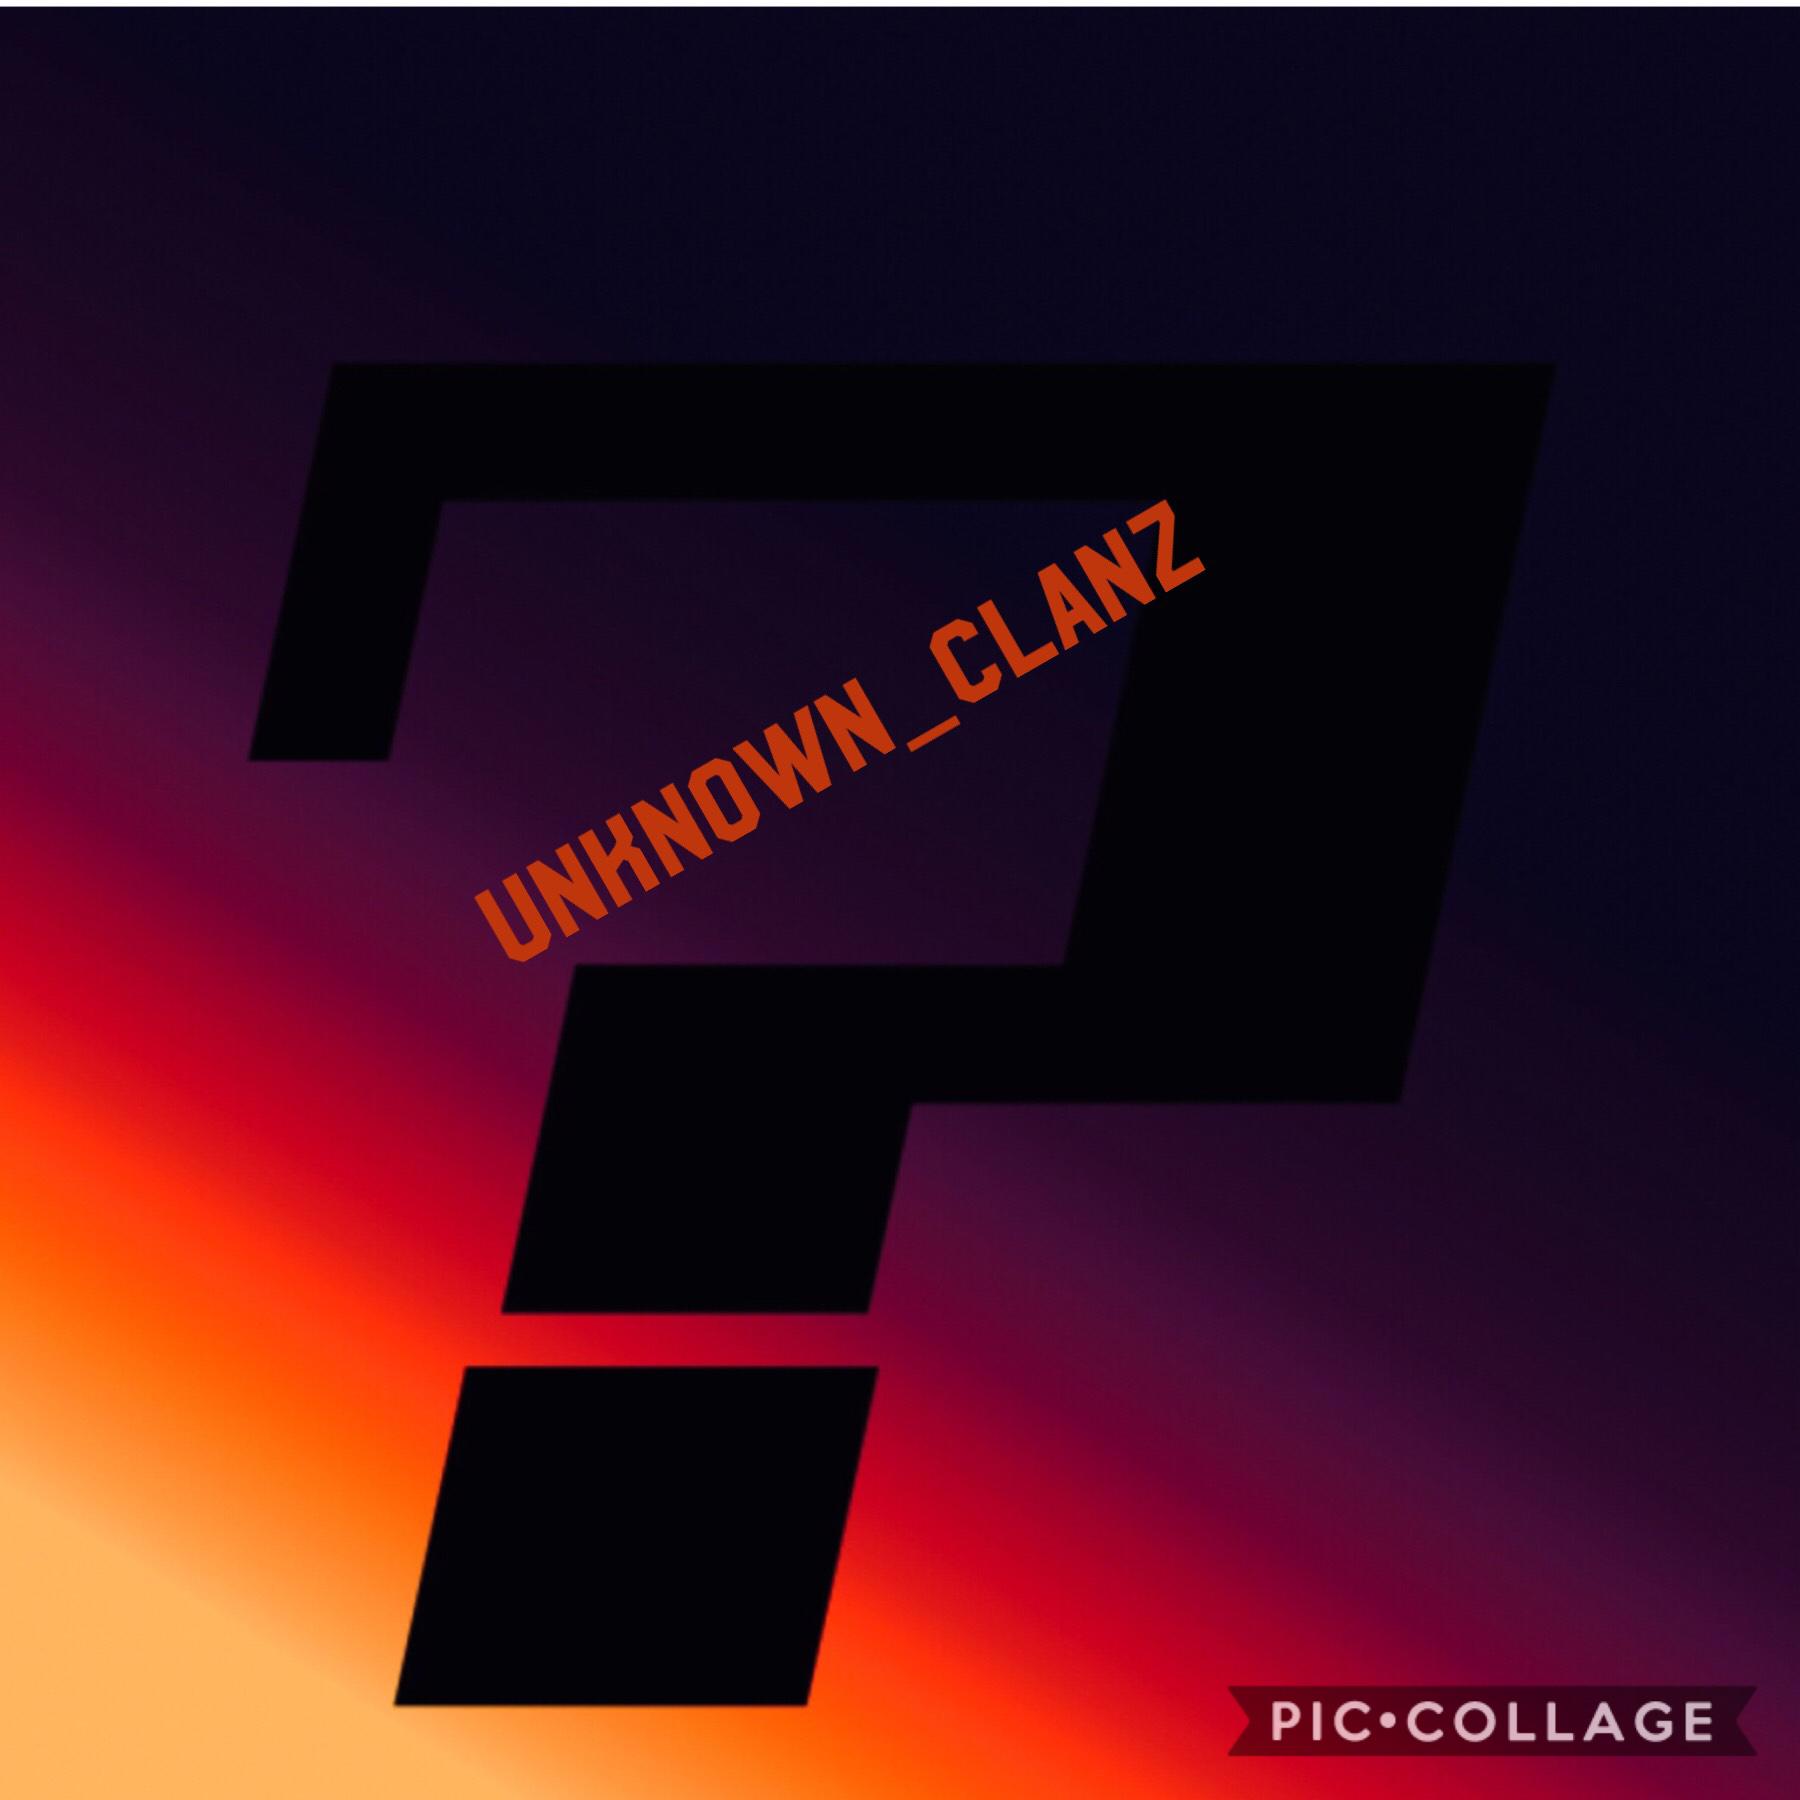 Subscribe to unknown_clanz and d.unknown1 on YouTube, Twitter and Instagram. Unknown_clanz is me and d.unknown1 is my friend. Subscribe and like anything we post. 😊